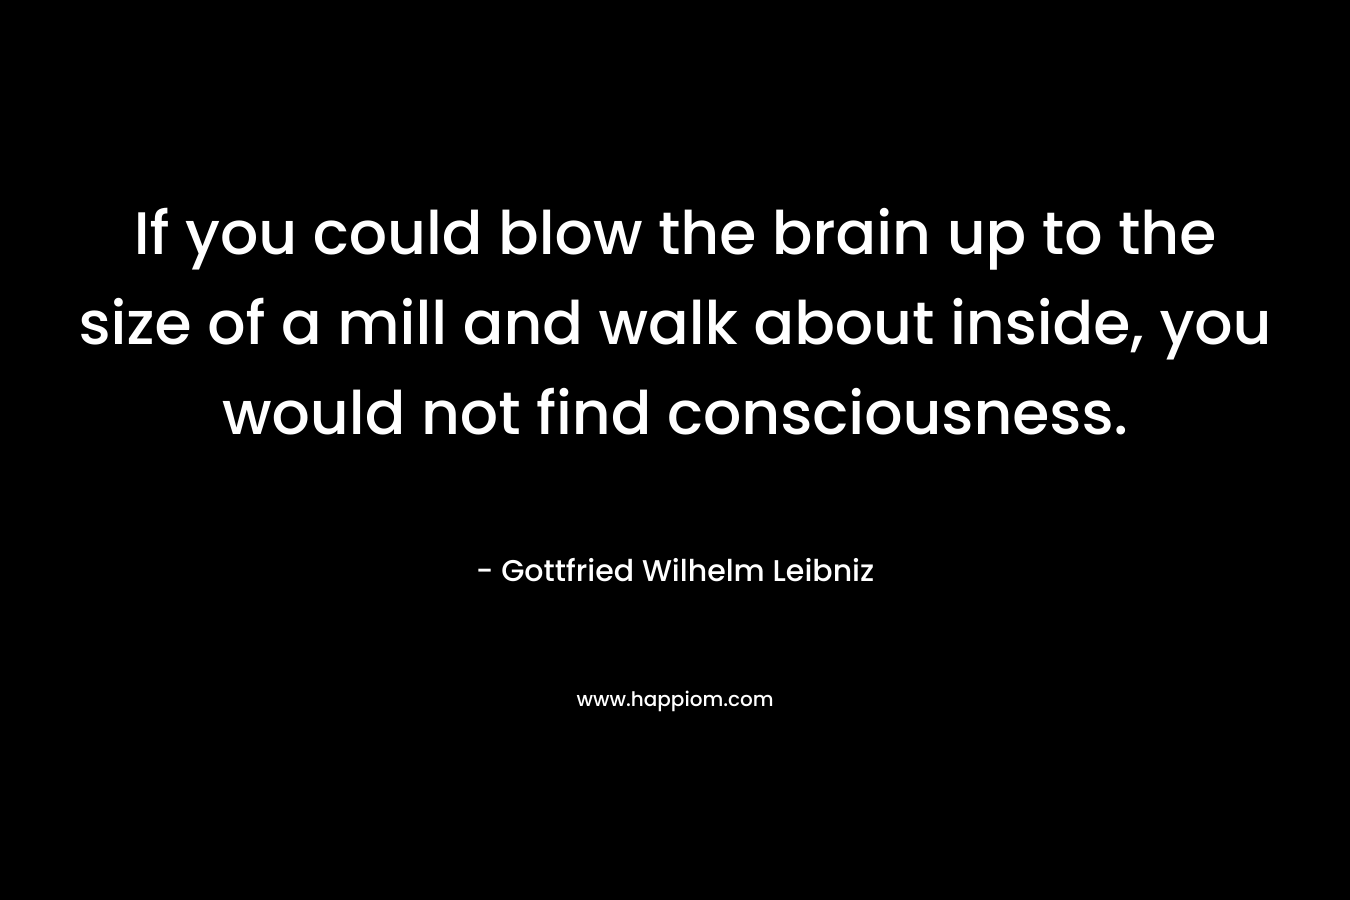 If you could blow the brain up to the size of a mill and walk about inside, you would not find consciousness. – Gottfried Wilhelm Leibniz